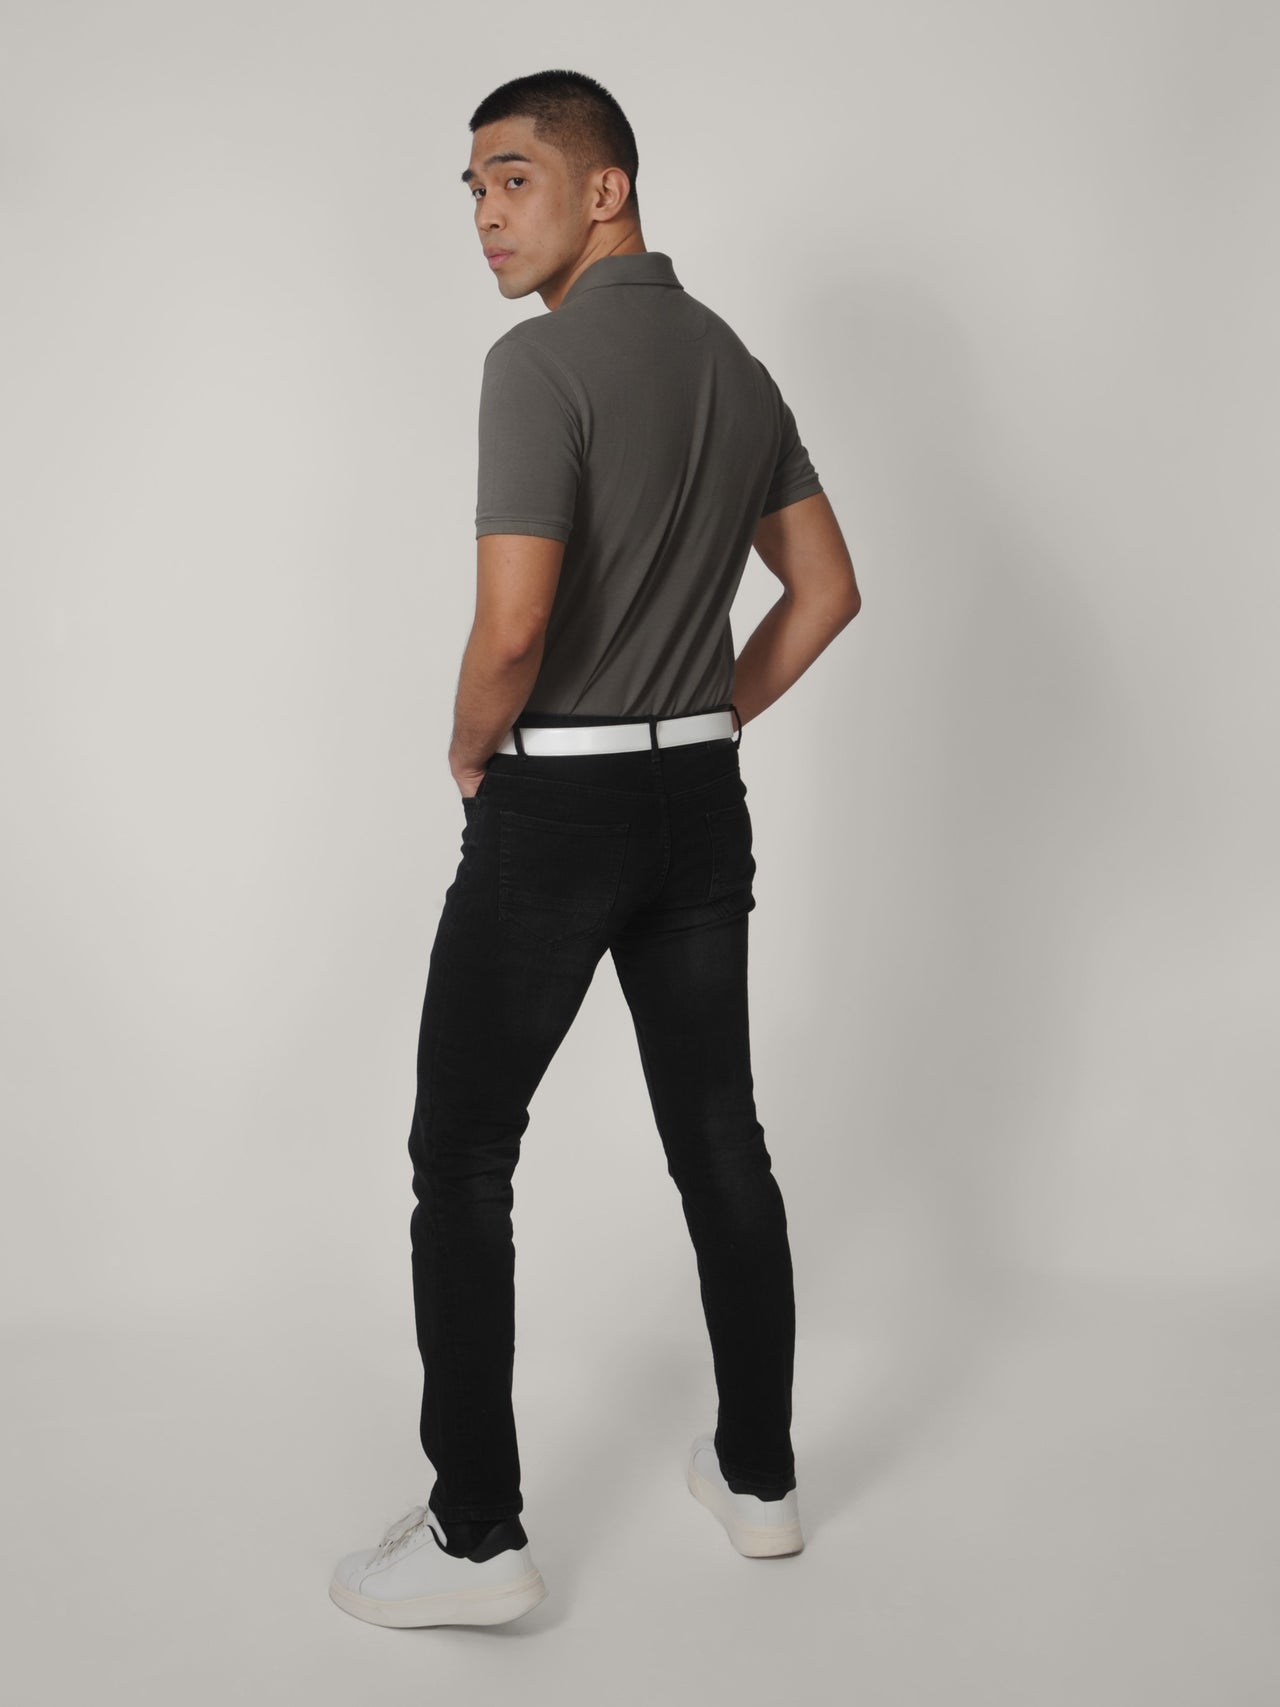 A shot from behind of a tall skinny guy wearing a tall grey pique polo shirt.